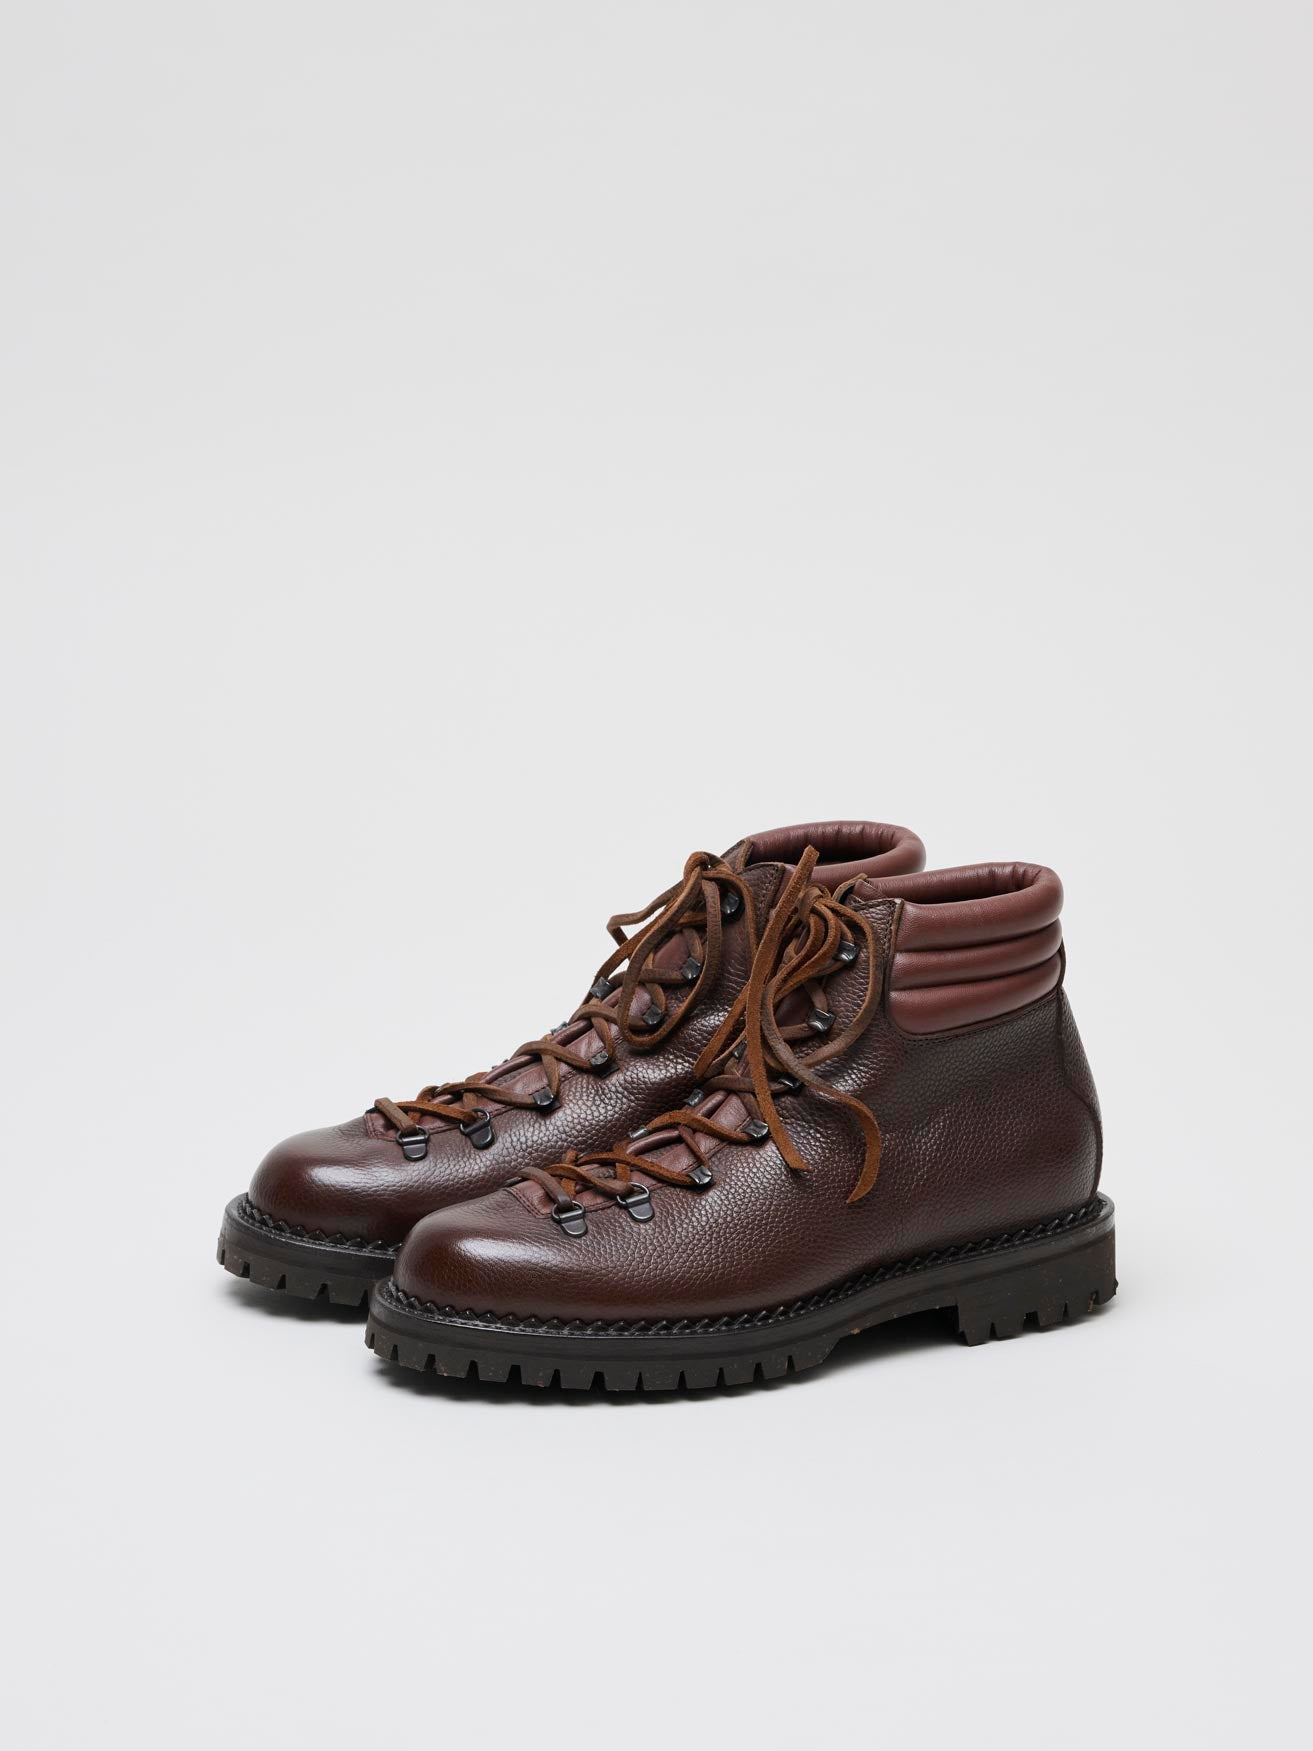 Vettore Boots, Pale Brown